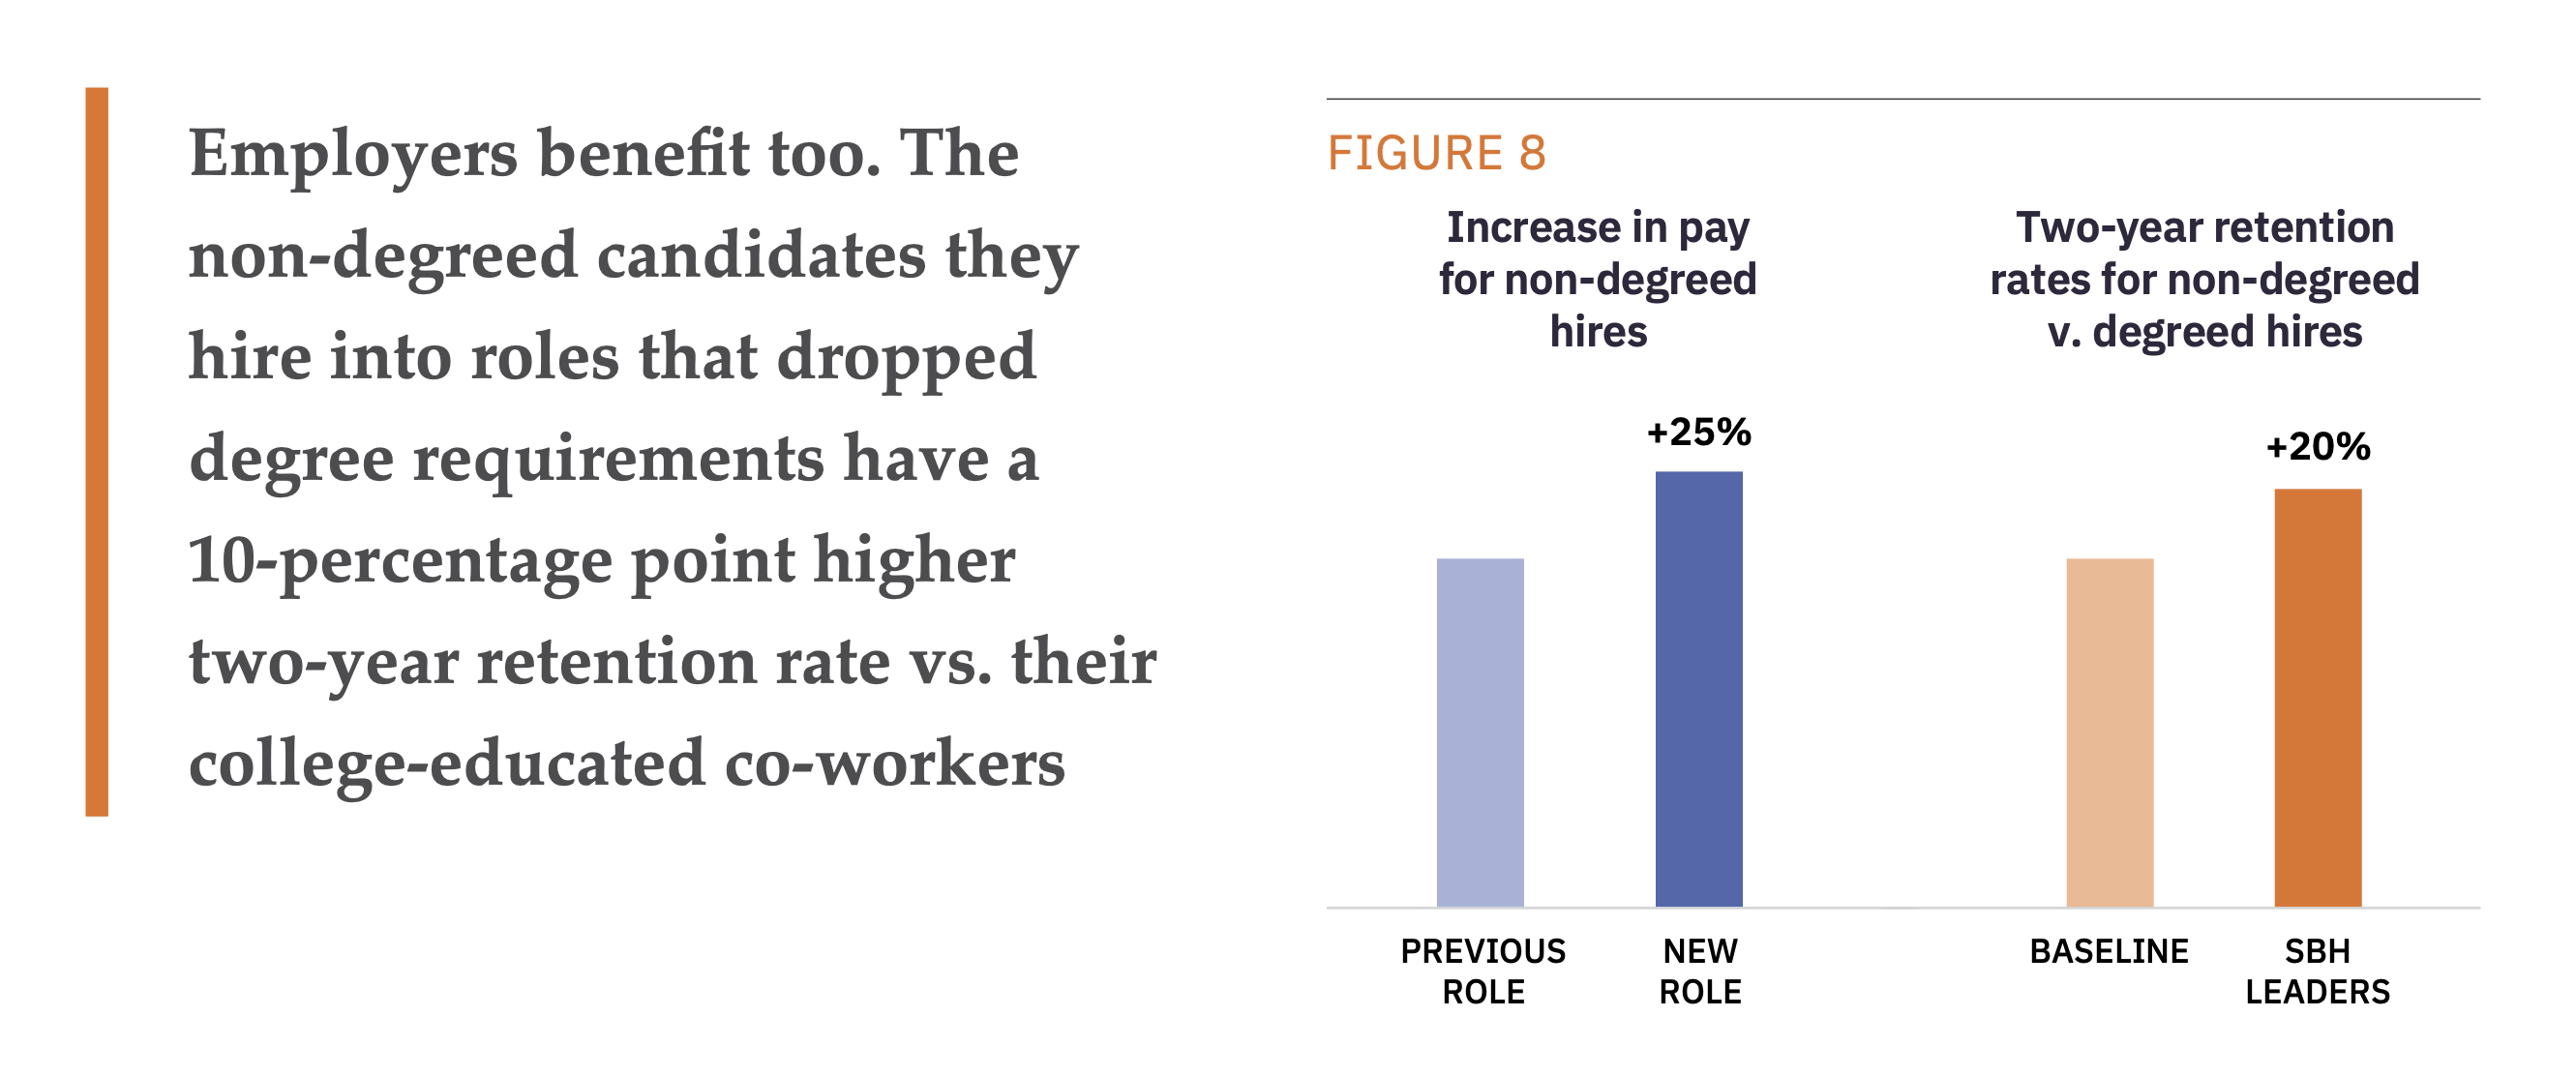 Non-degreed hires having a 20% increase in retention vs. their college-educated co-workers